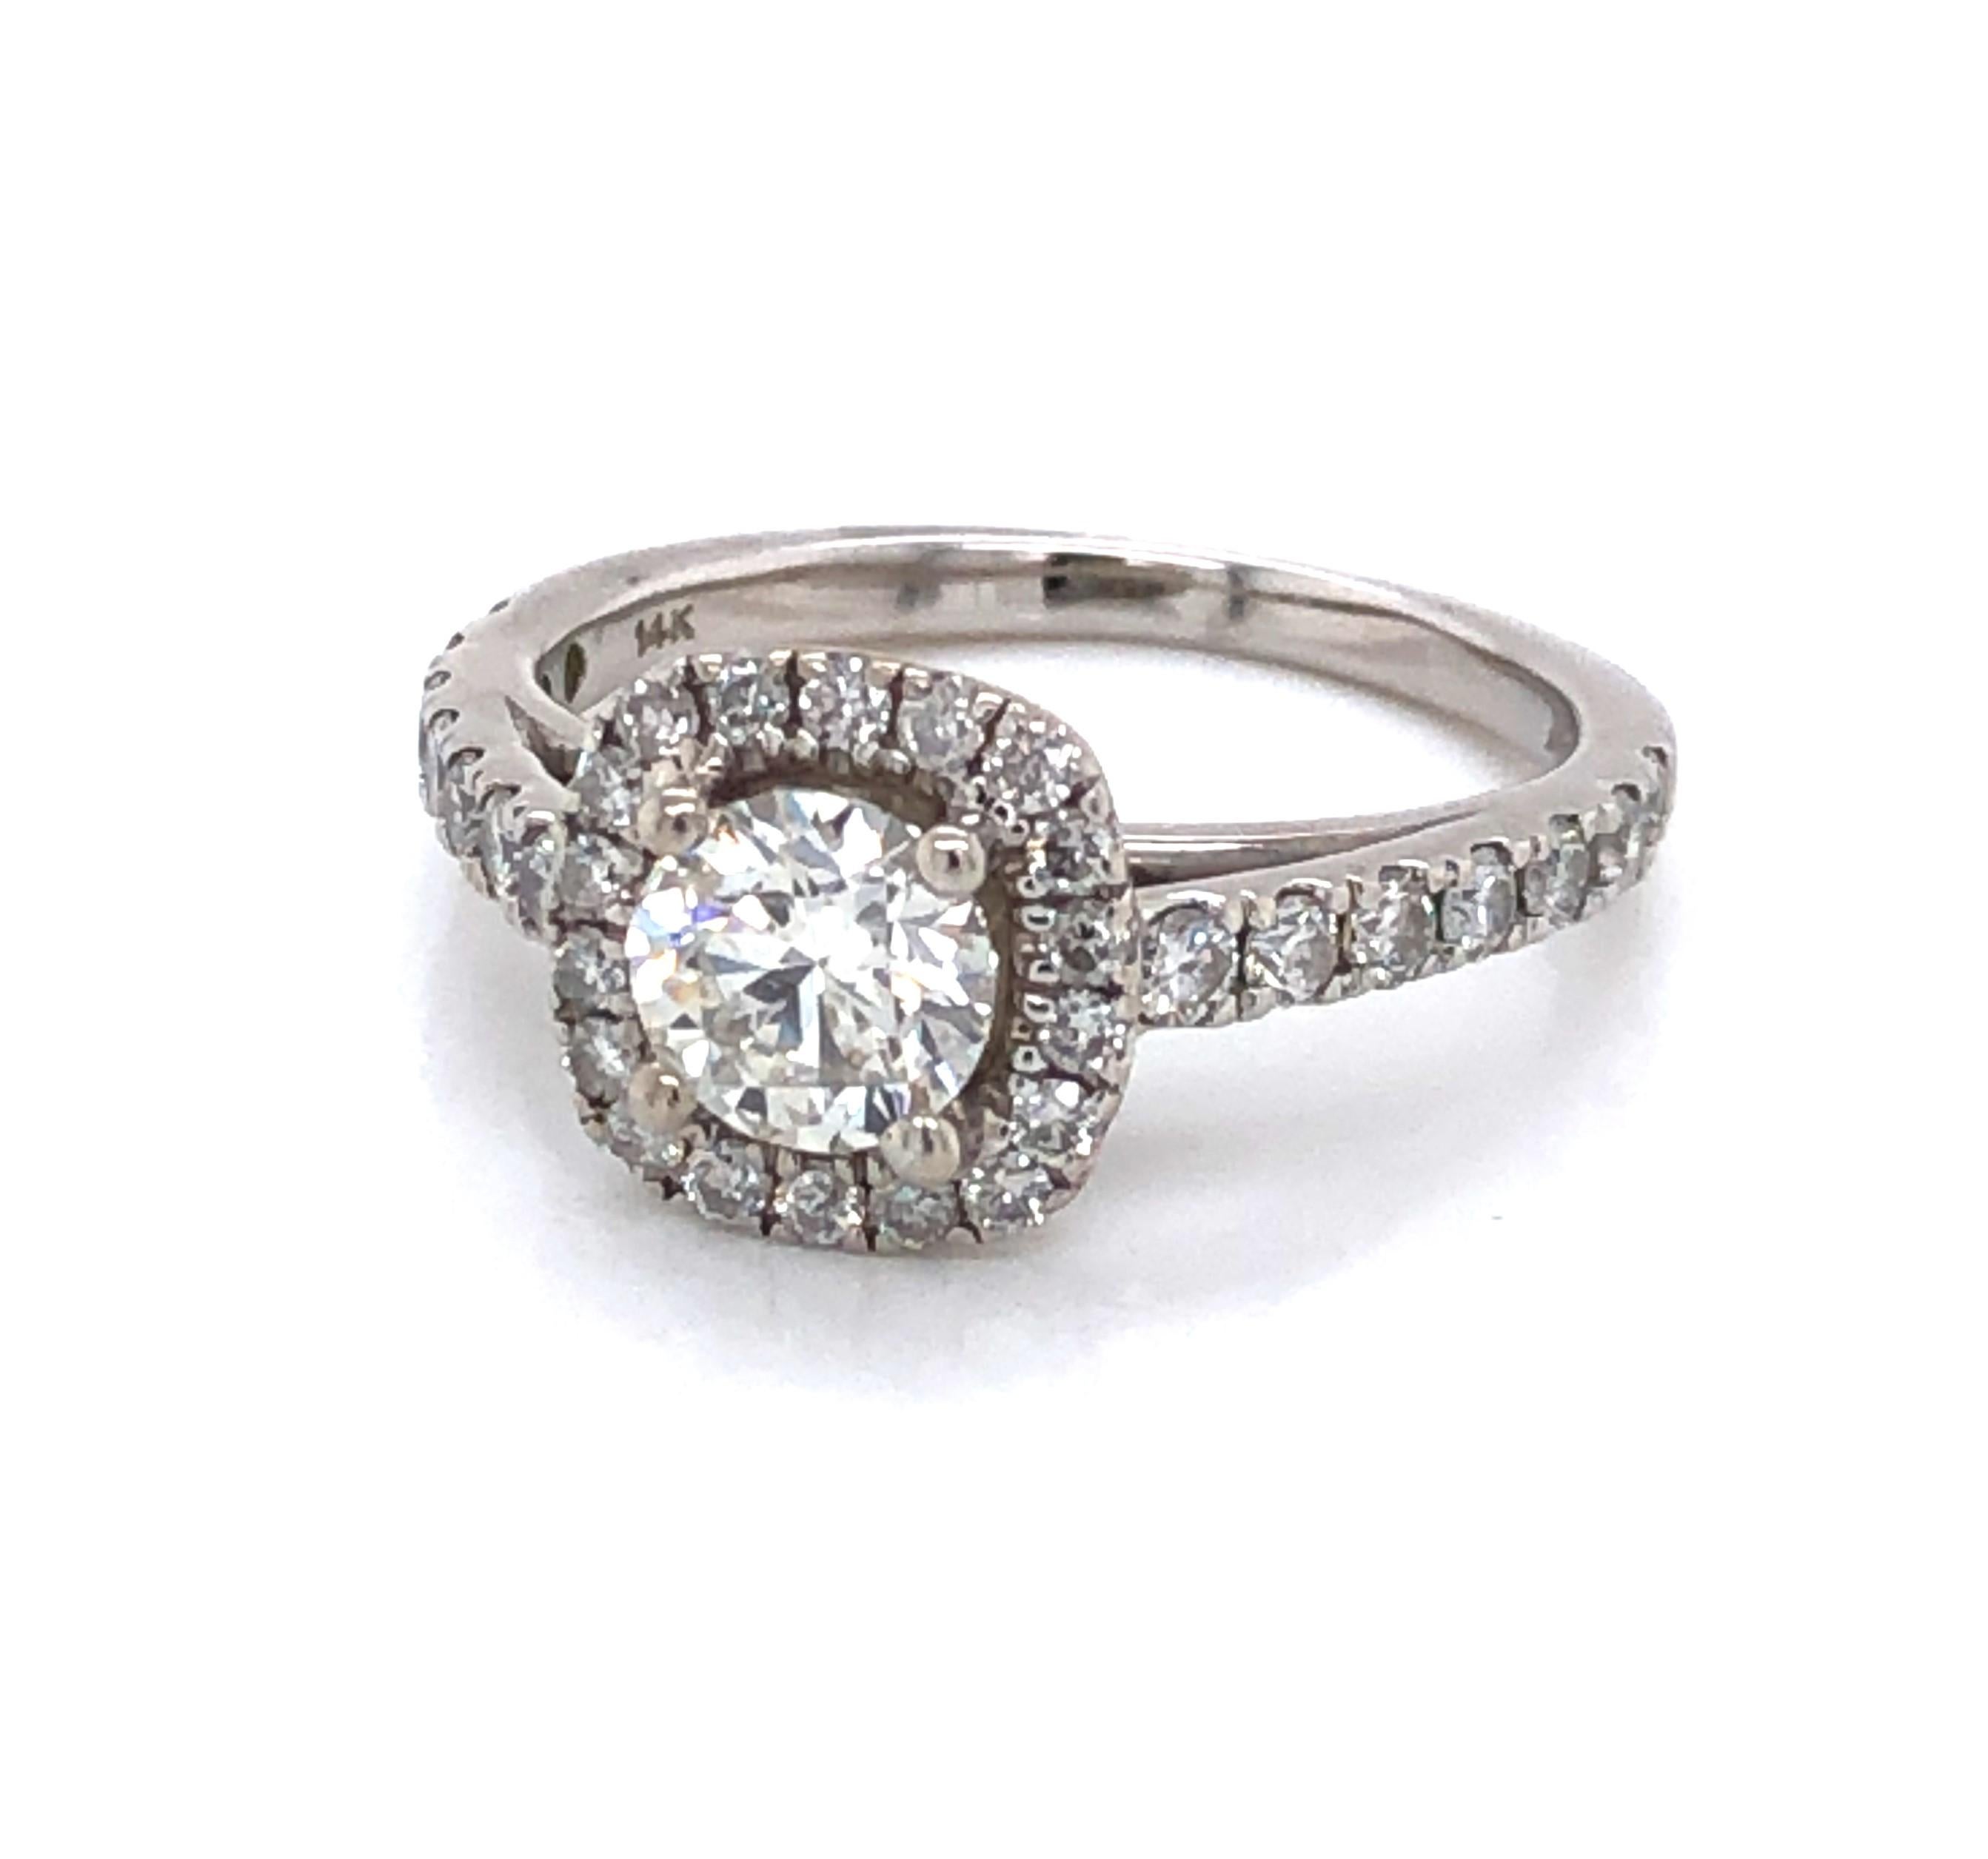 Diamond Cushion Halo Style White Gold Engagement Ring In Excellent Condition For Sale In Mount Kisco, NY